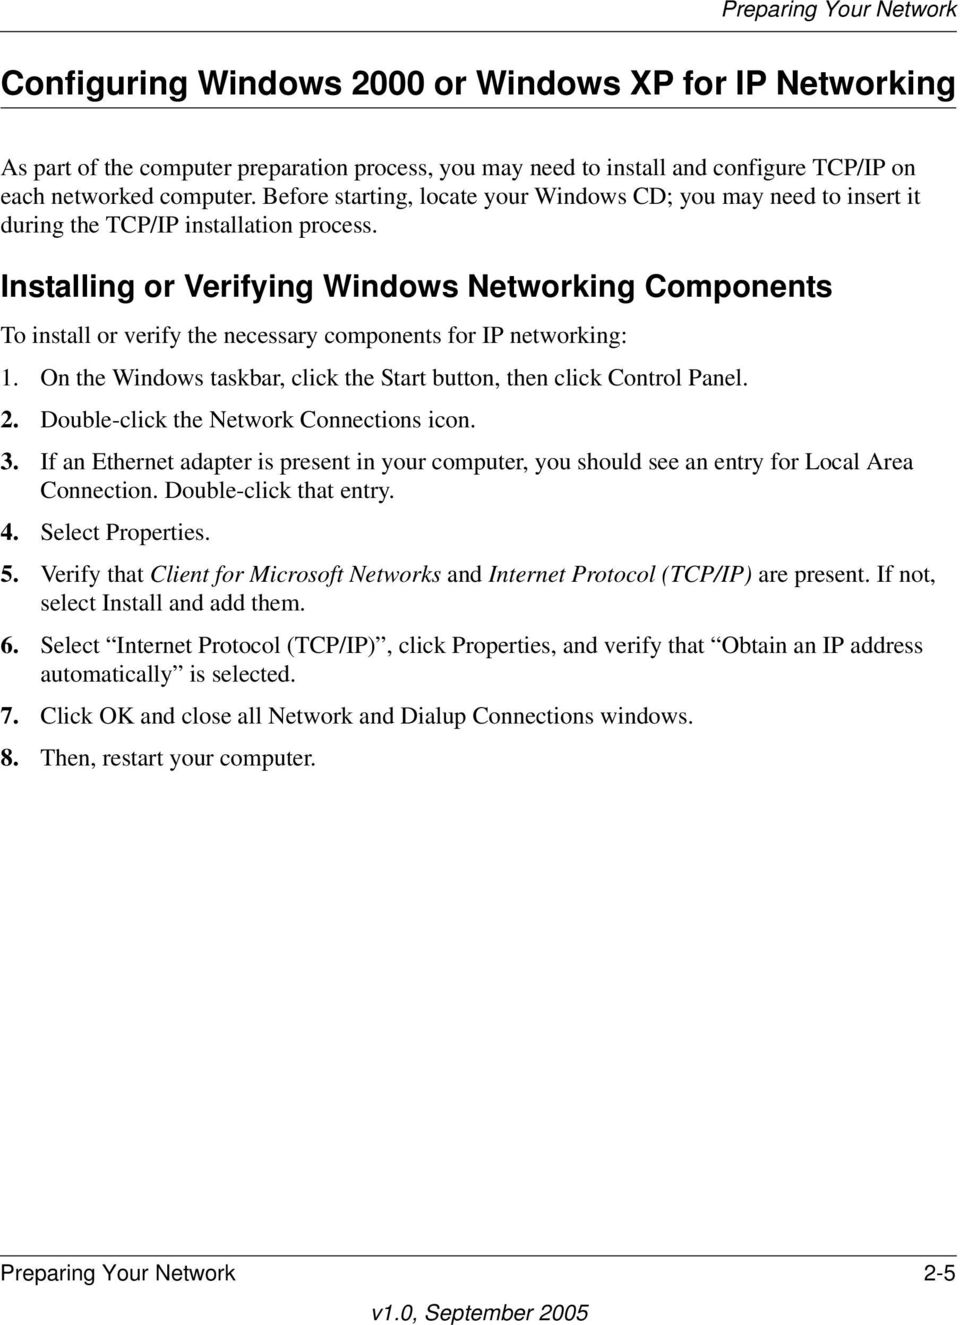 Installing or Verifying Windows Networking Components To install or verify the necessary components for IP networking: 1. On the Windows taskbar, click the Start button, then click Control Panel. 2.